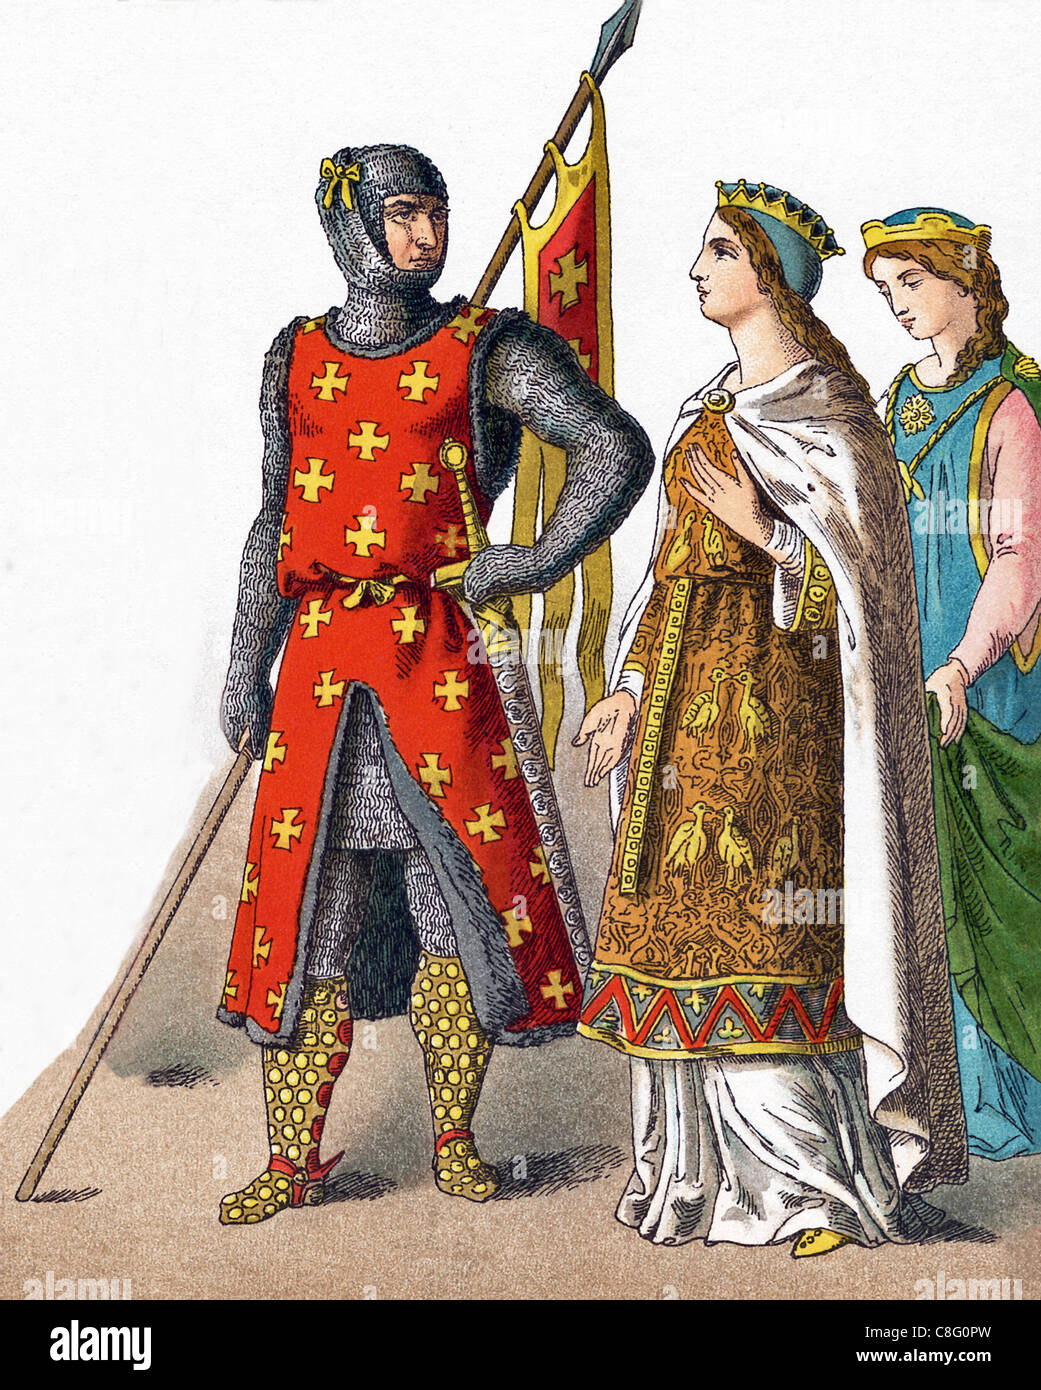 The figures shown here represent Germans around A.D. 1100. They are from left to right: a warrior and two princesses. Stock Photo